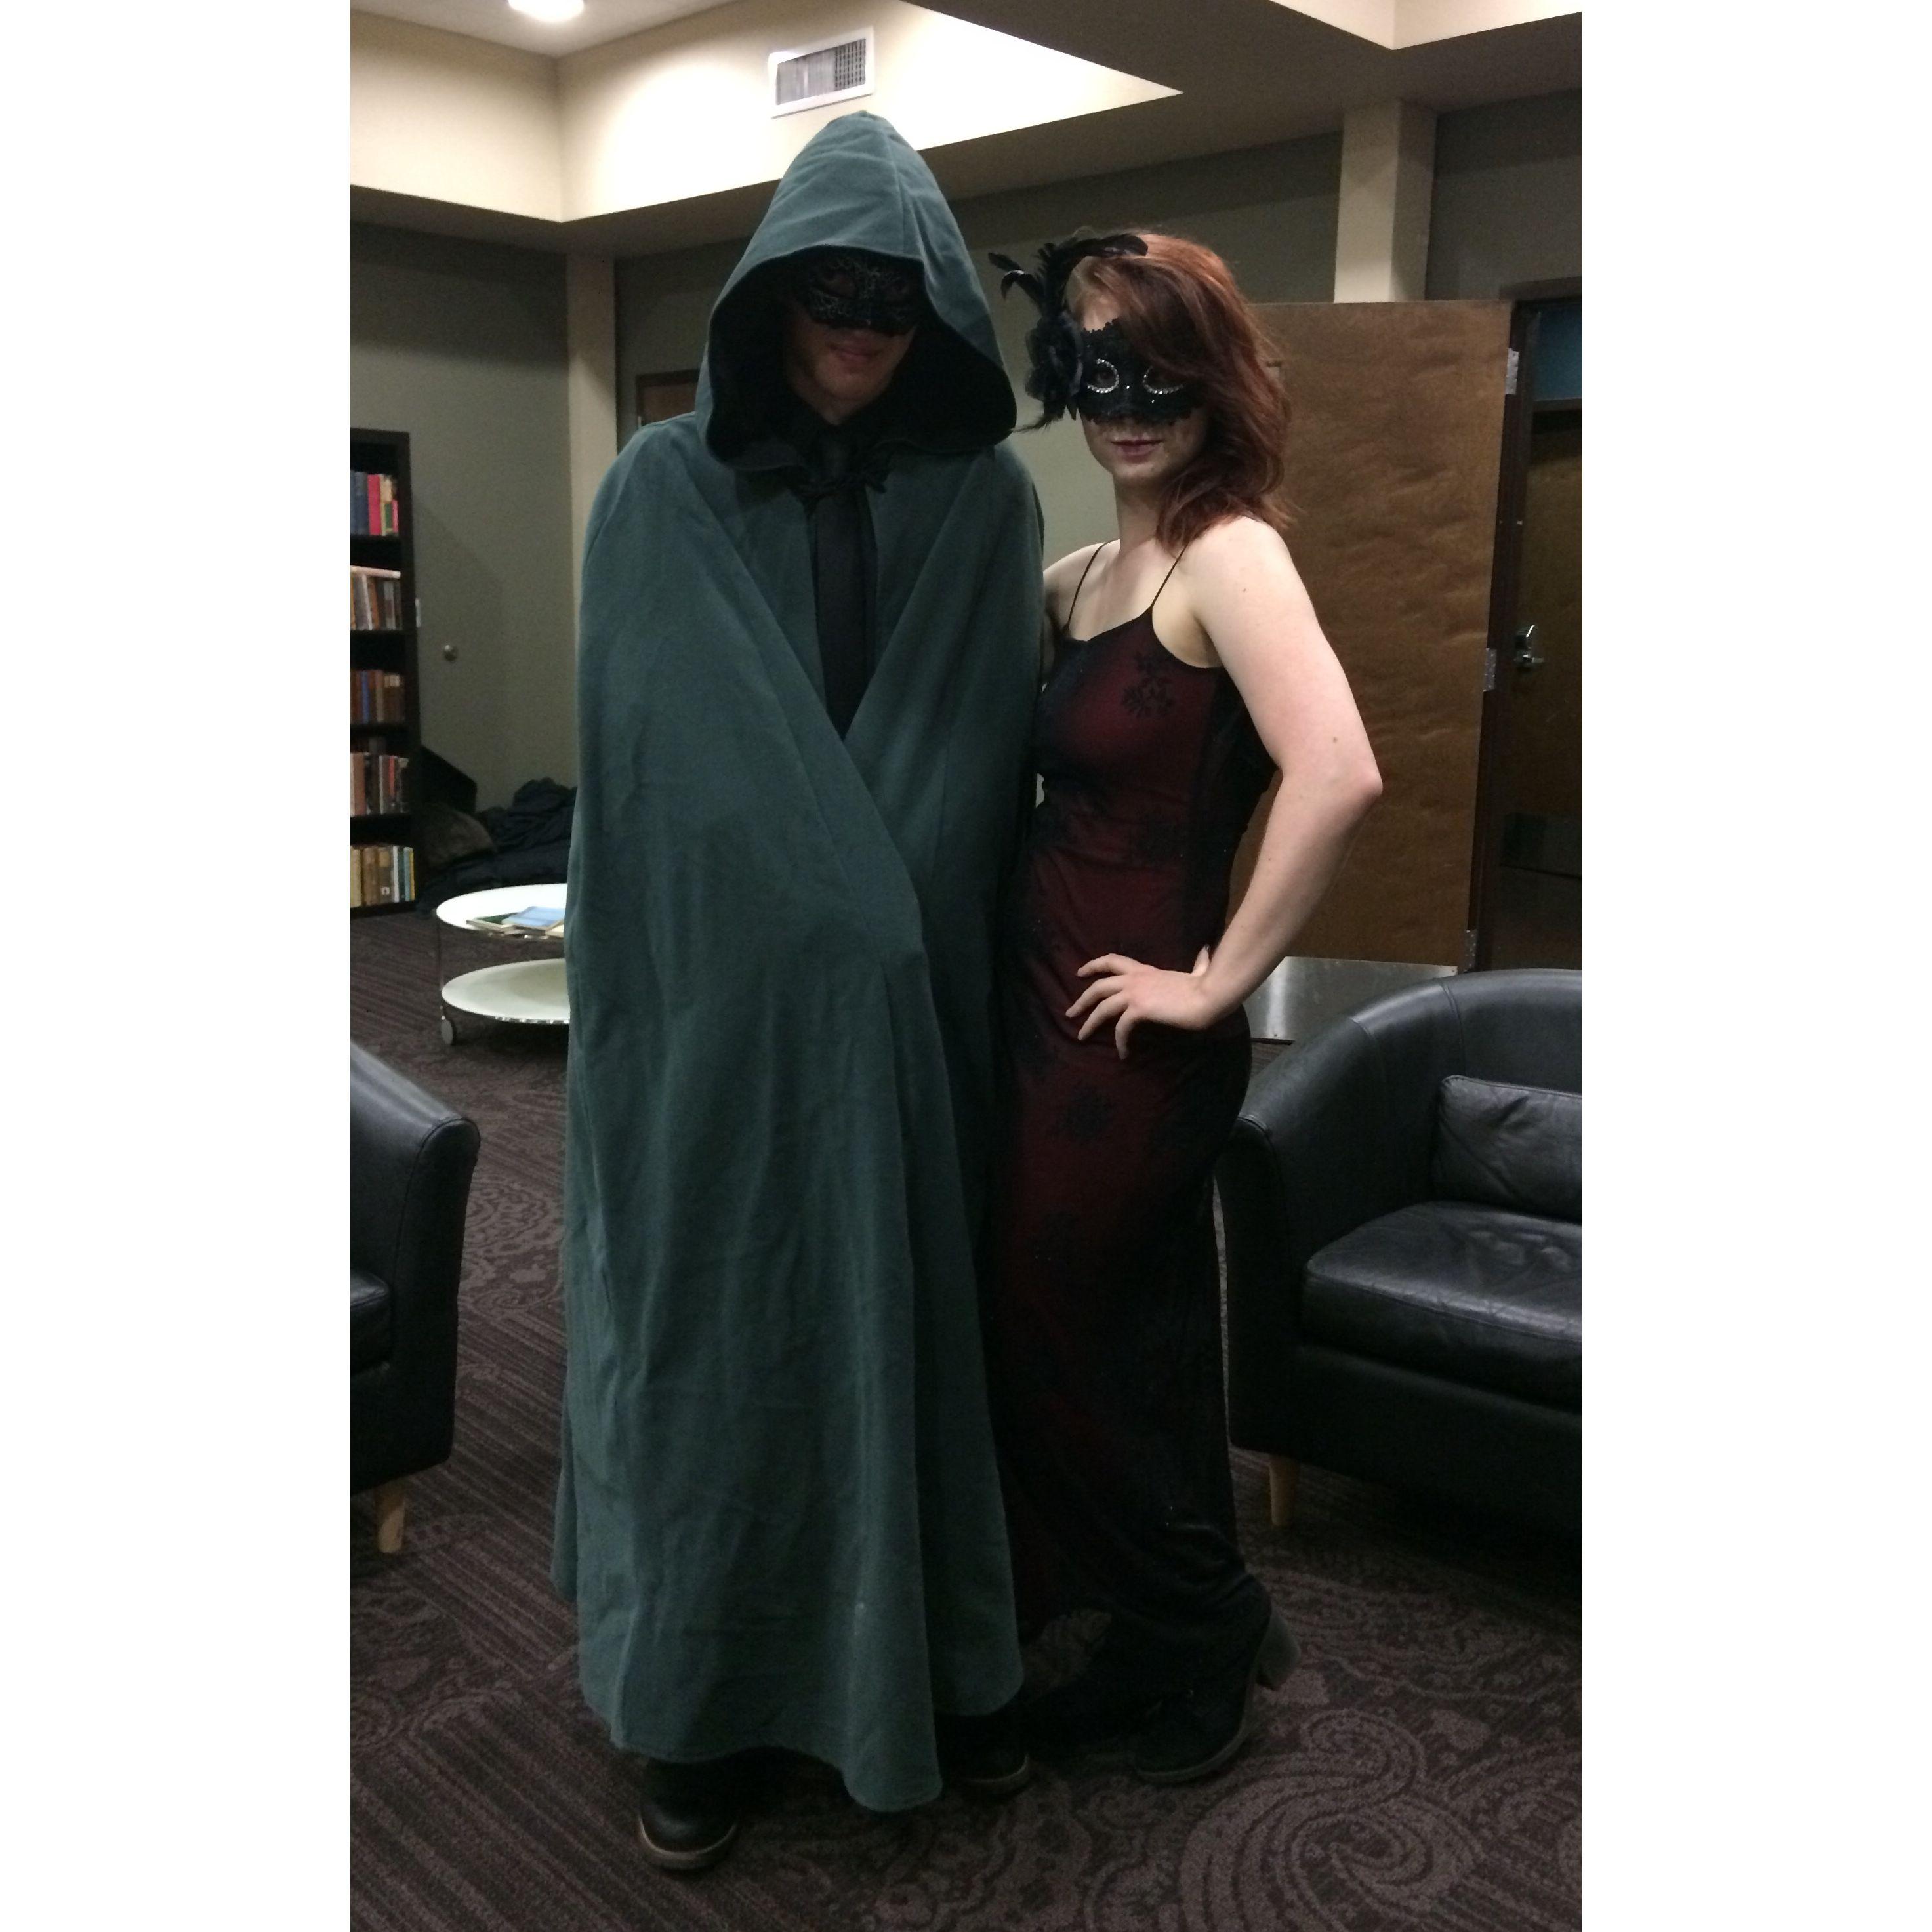 Alex and Eliza dressed appropriately for the Masquerade themed freshman-senior welcome party, early September 2018 (not dating yet)
(Also Alex is wearing a cloak that belongs to Eliza)